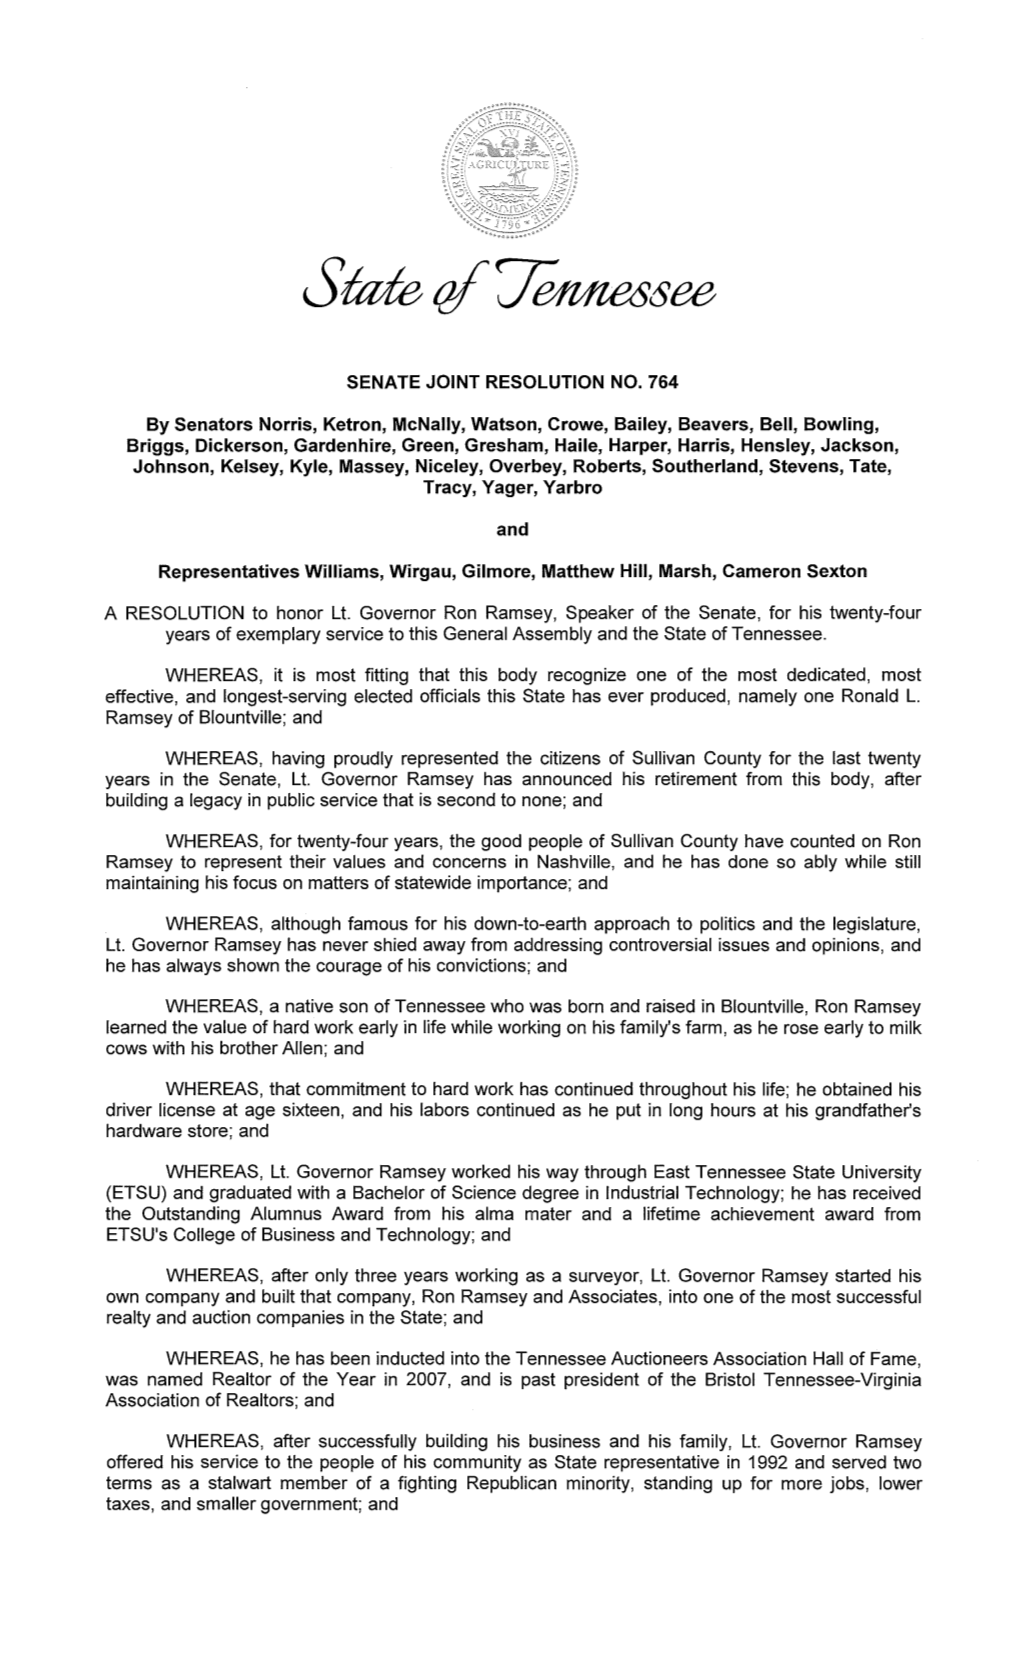 A RESOLUTION to Honor Lt. Governor Ron Ramsey, Speaker of The